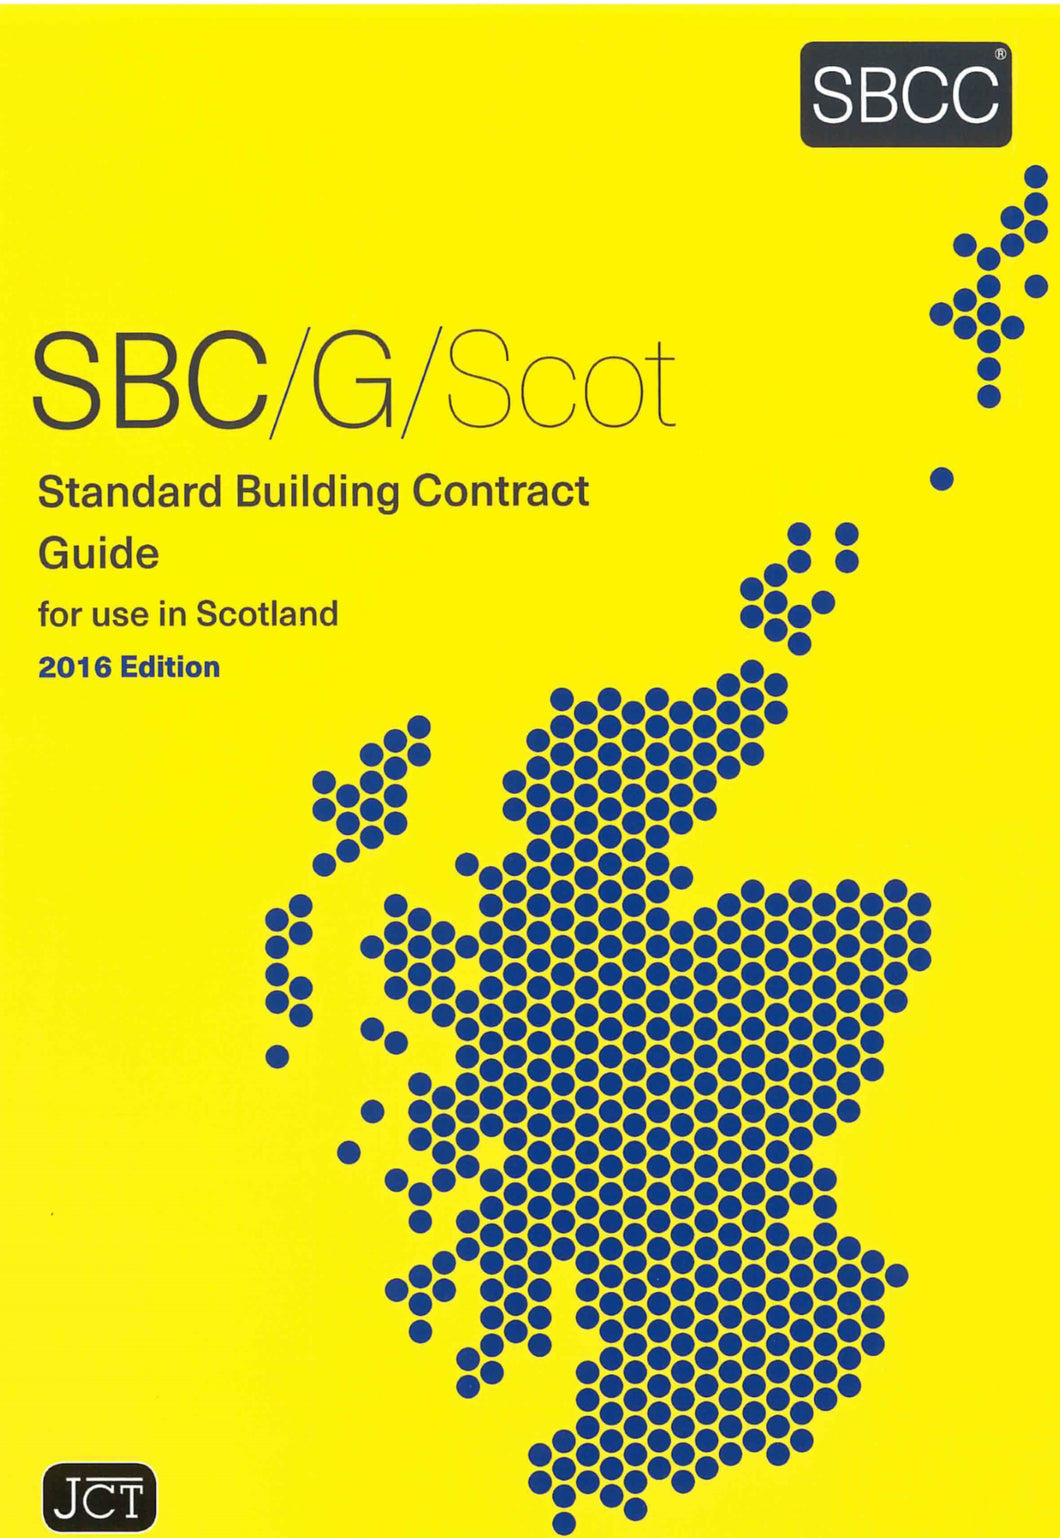 Standard Building Contract Guide for use in Scotland 2016